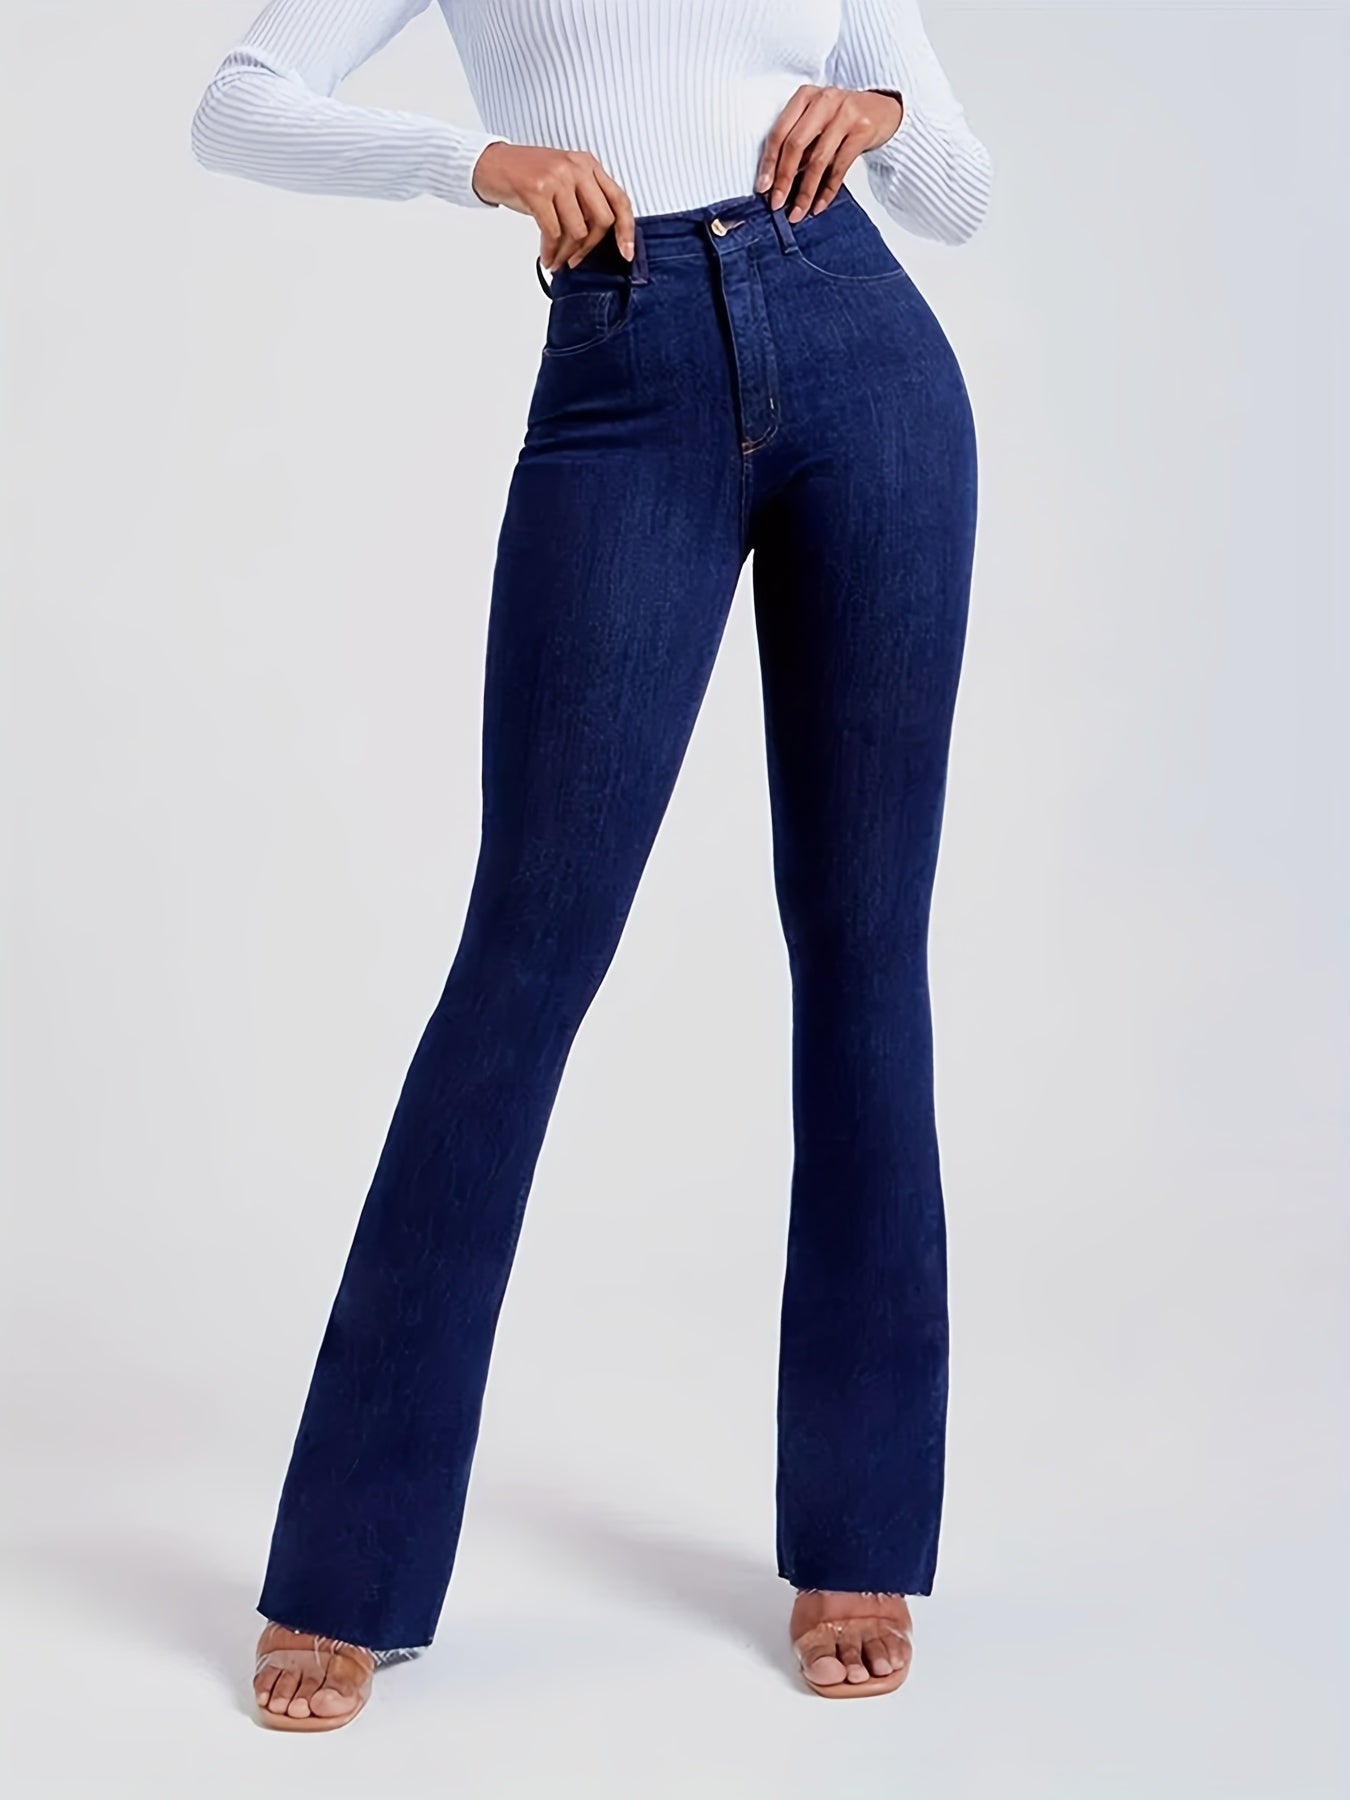 「lovevop」Solid Color Butt Lifting Flare Jeans For Women, Vintage Stretchy Zip Up Bootcut Pants, Women's Denim Jeans & Clothing